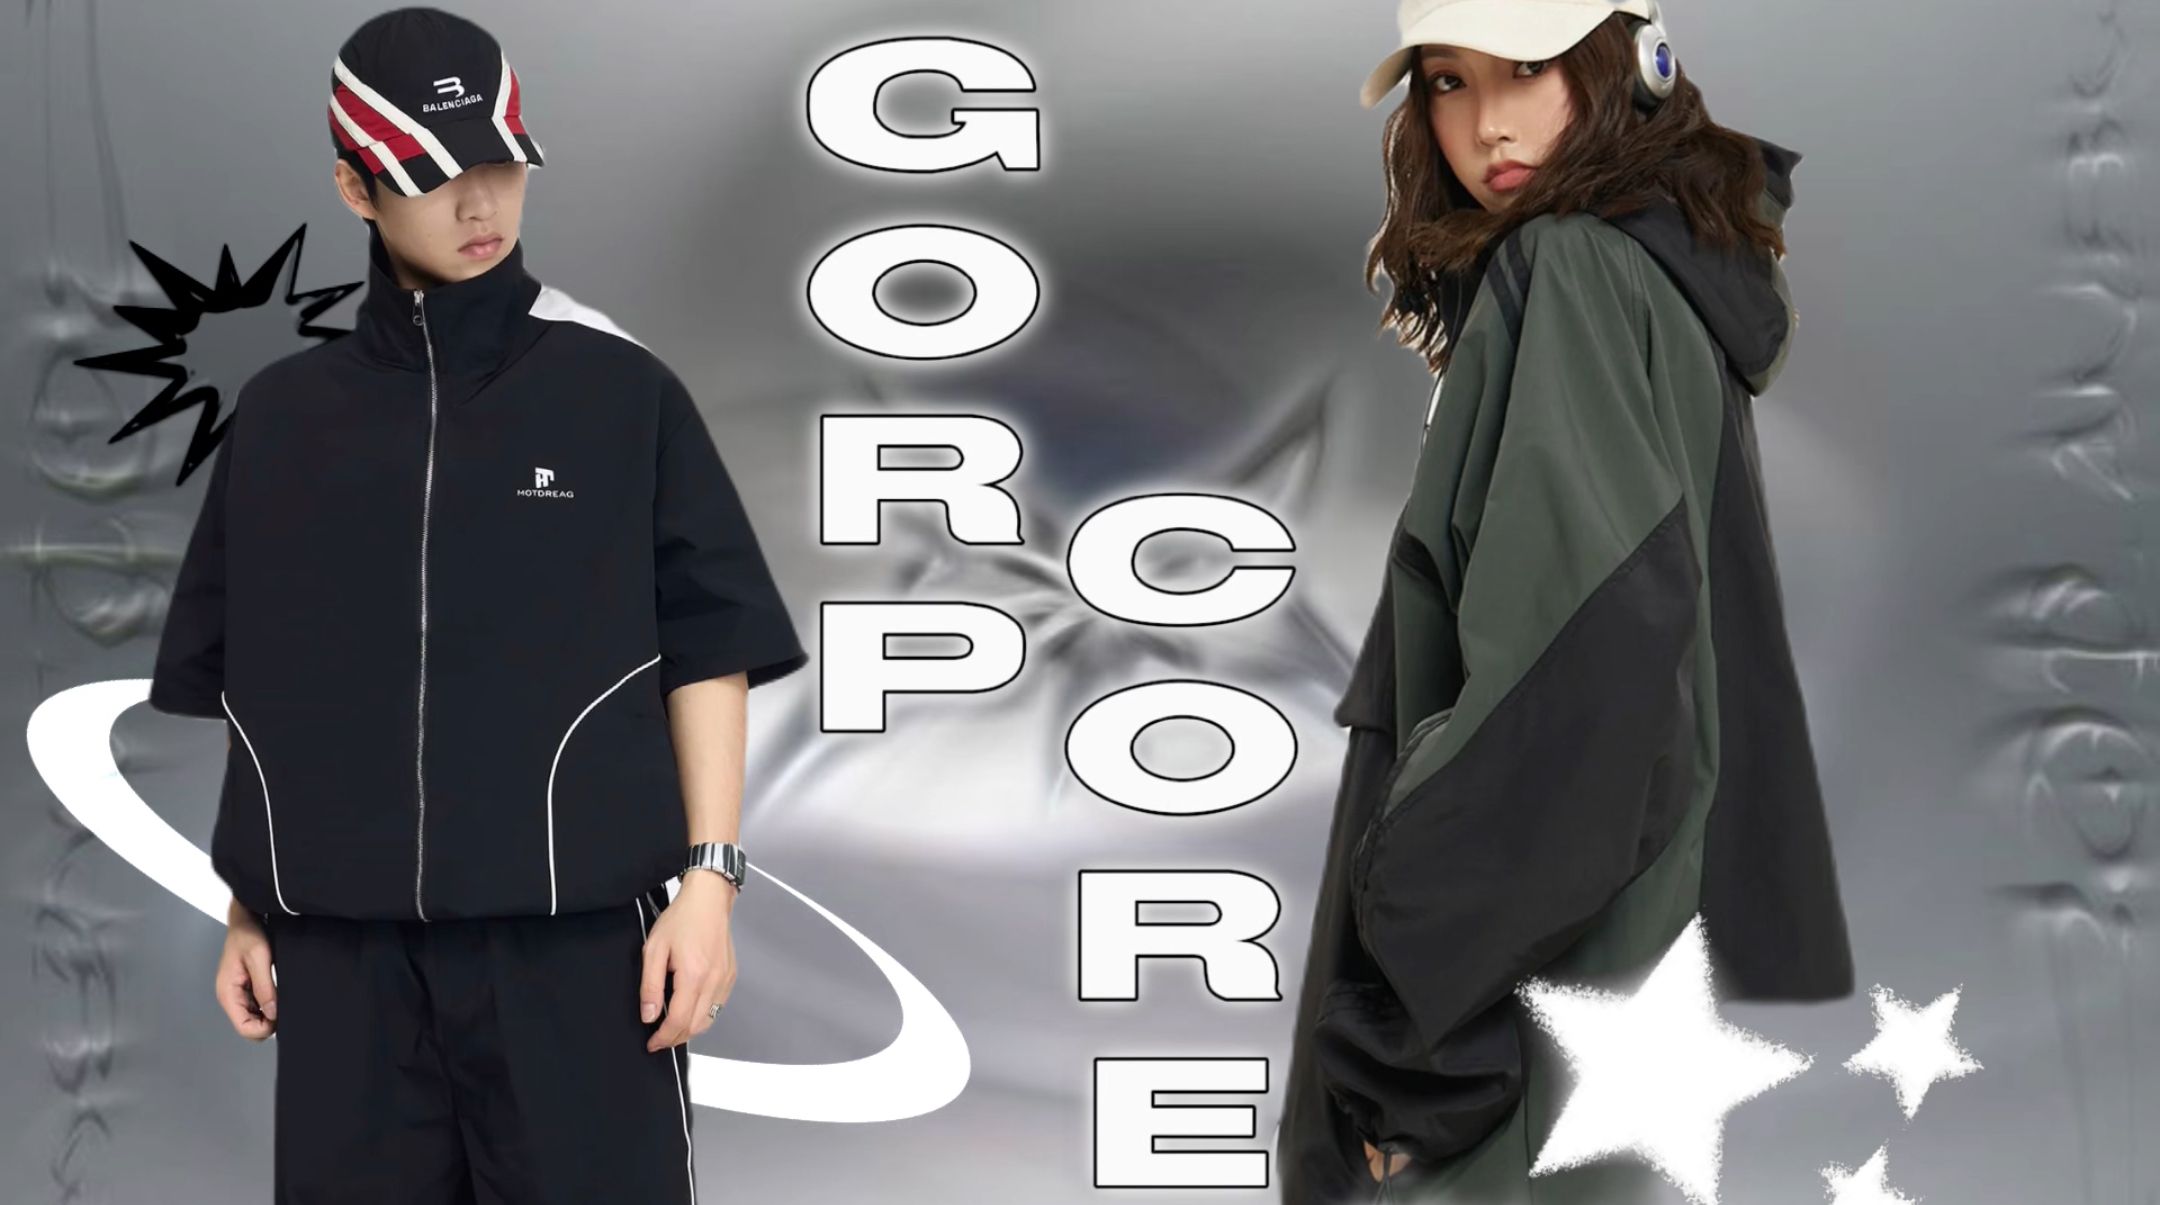 Get geared up for GORPCORE